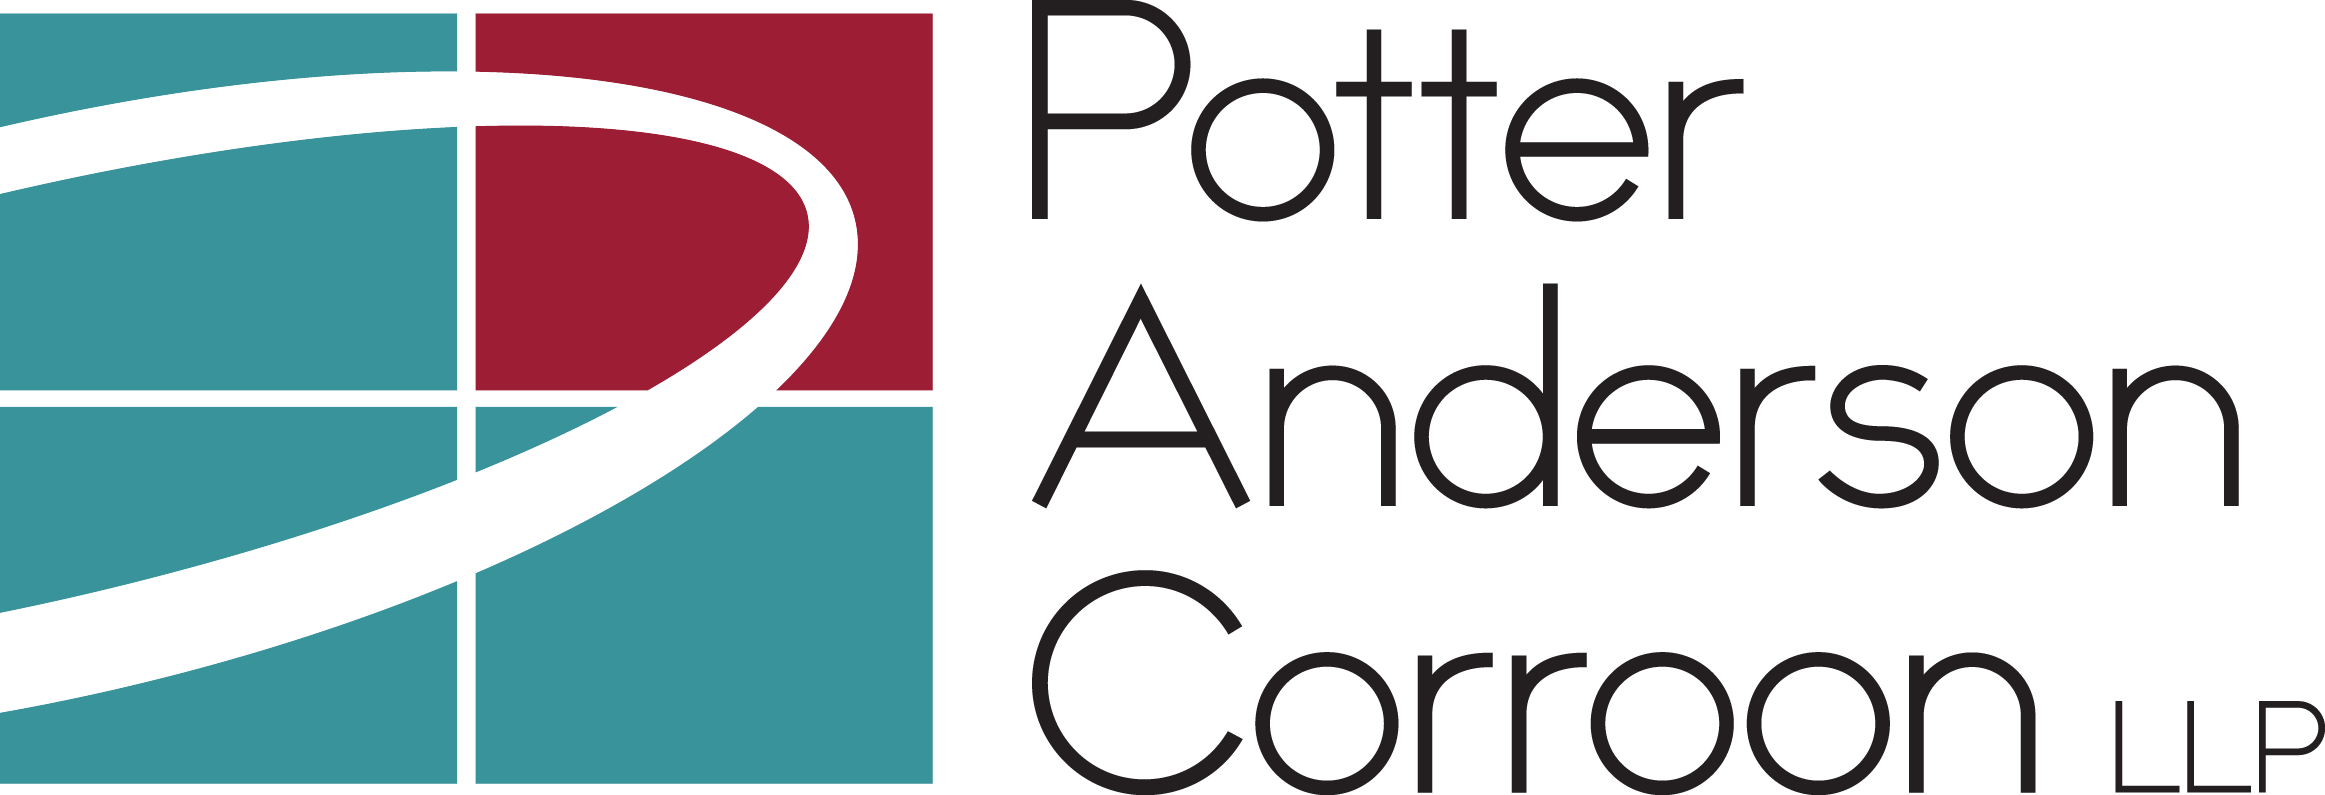 Potter Anderson